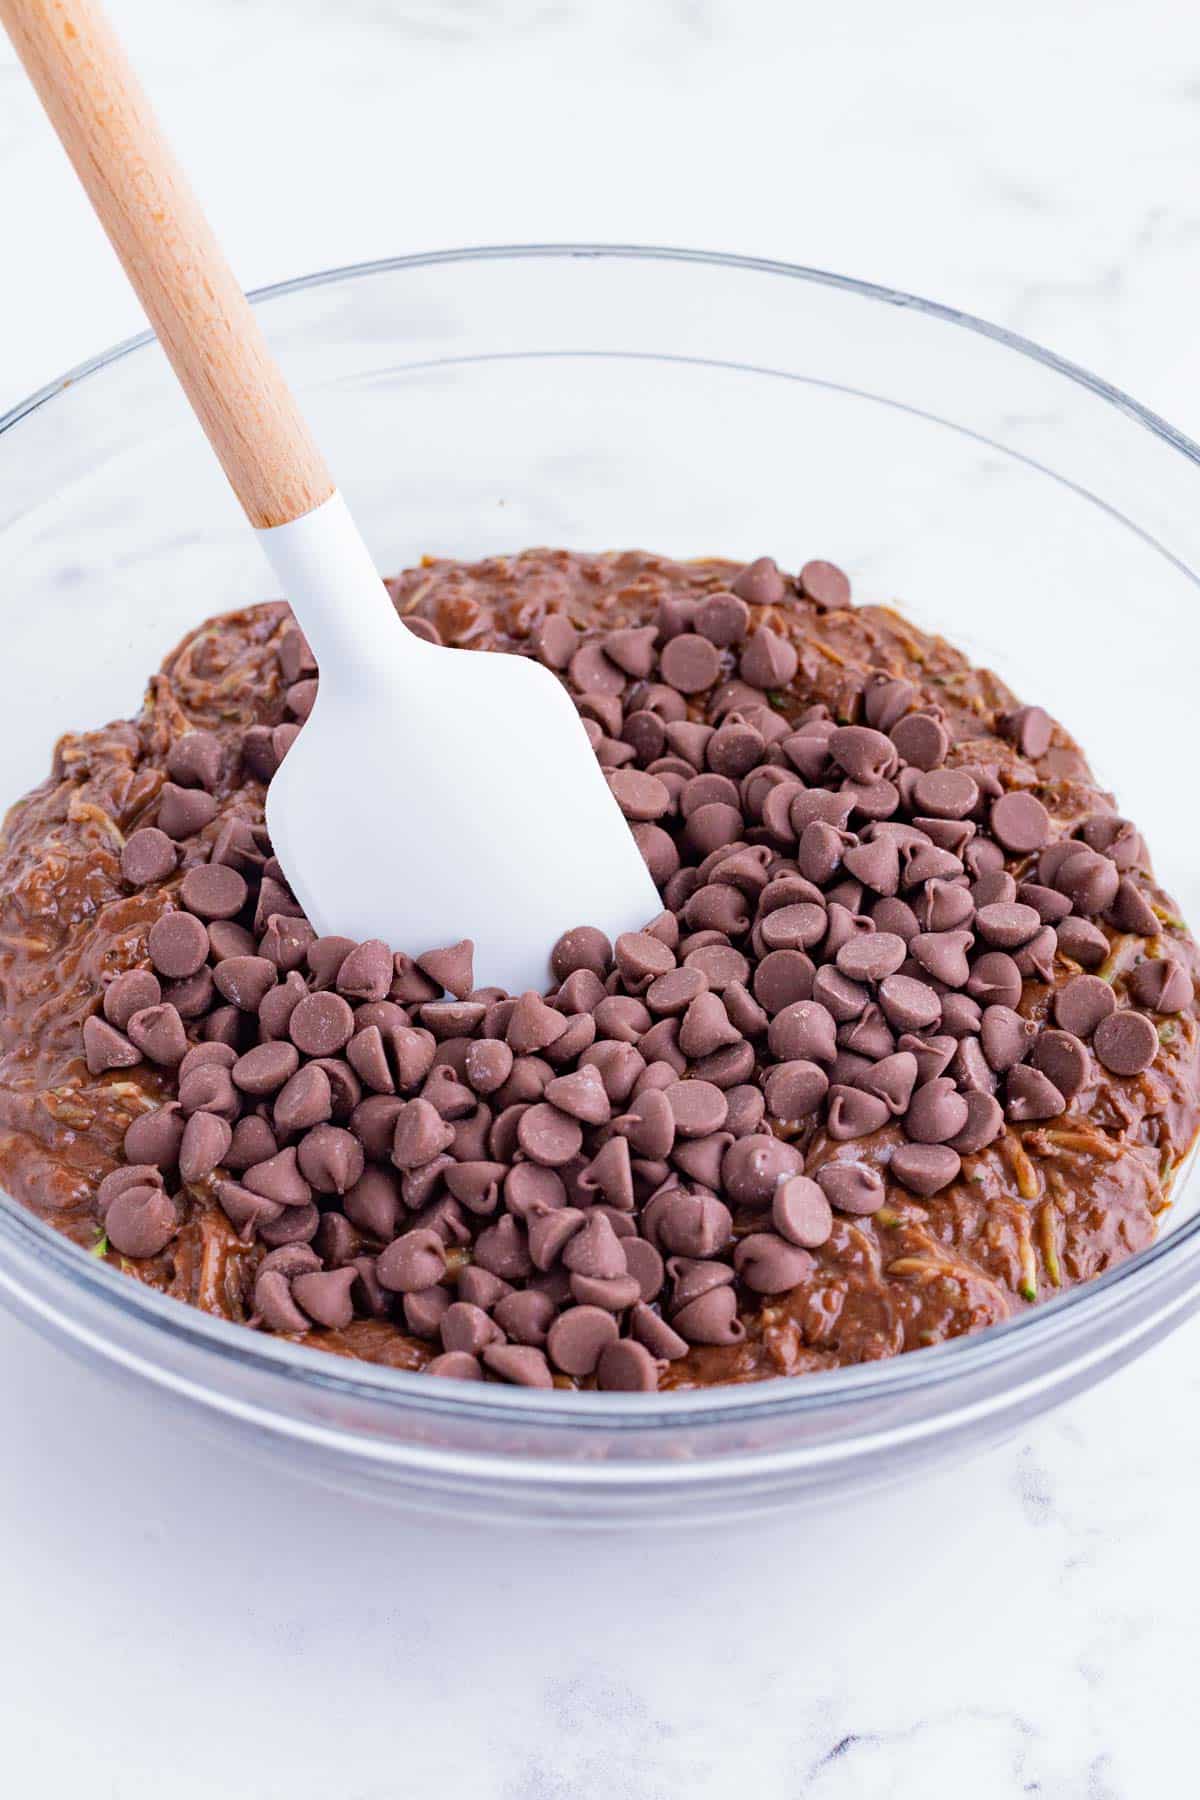 Chocolate chips are stirred into the brownie batter.